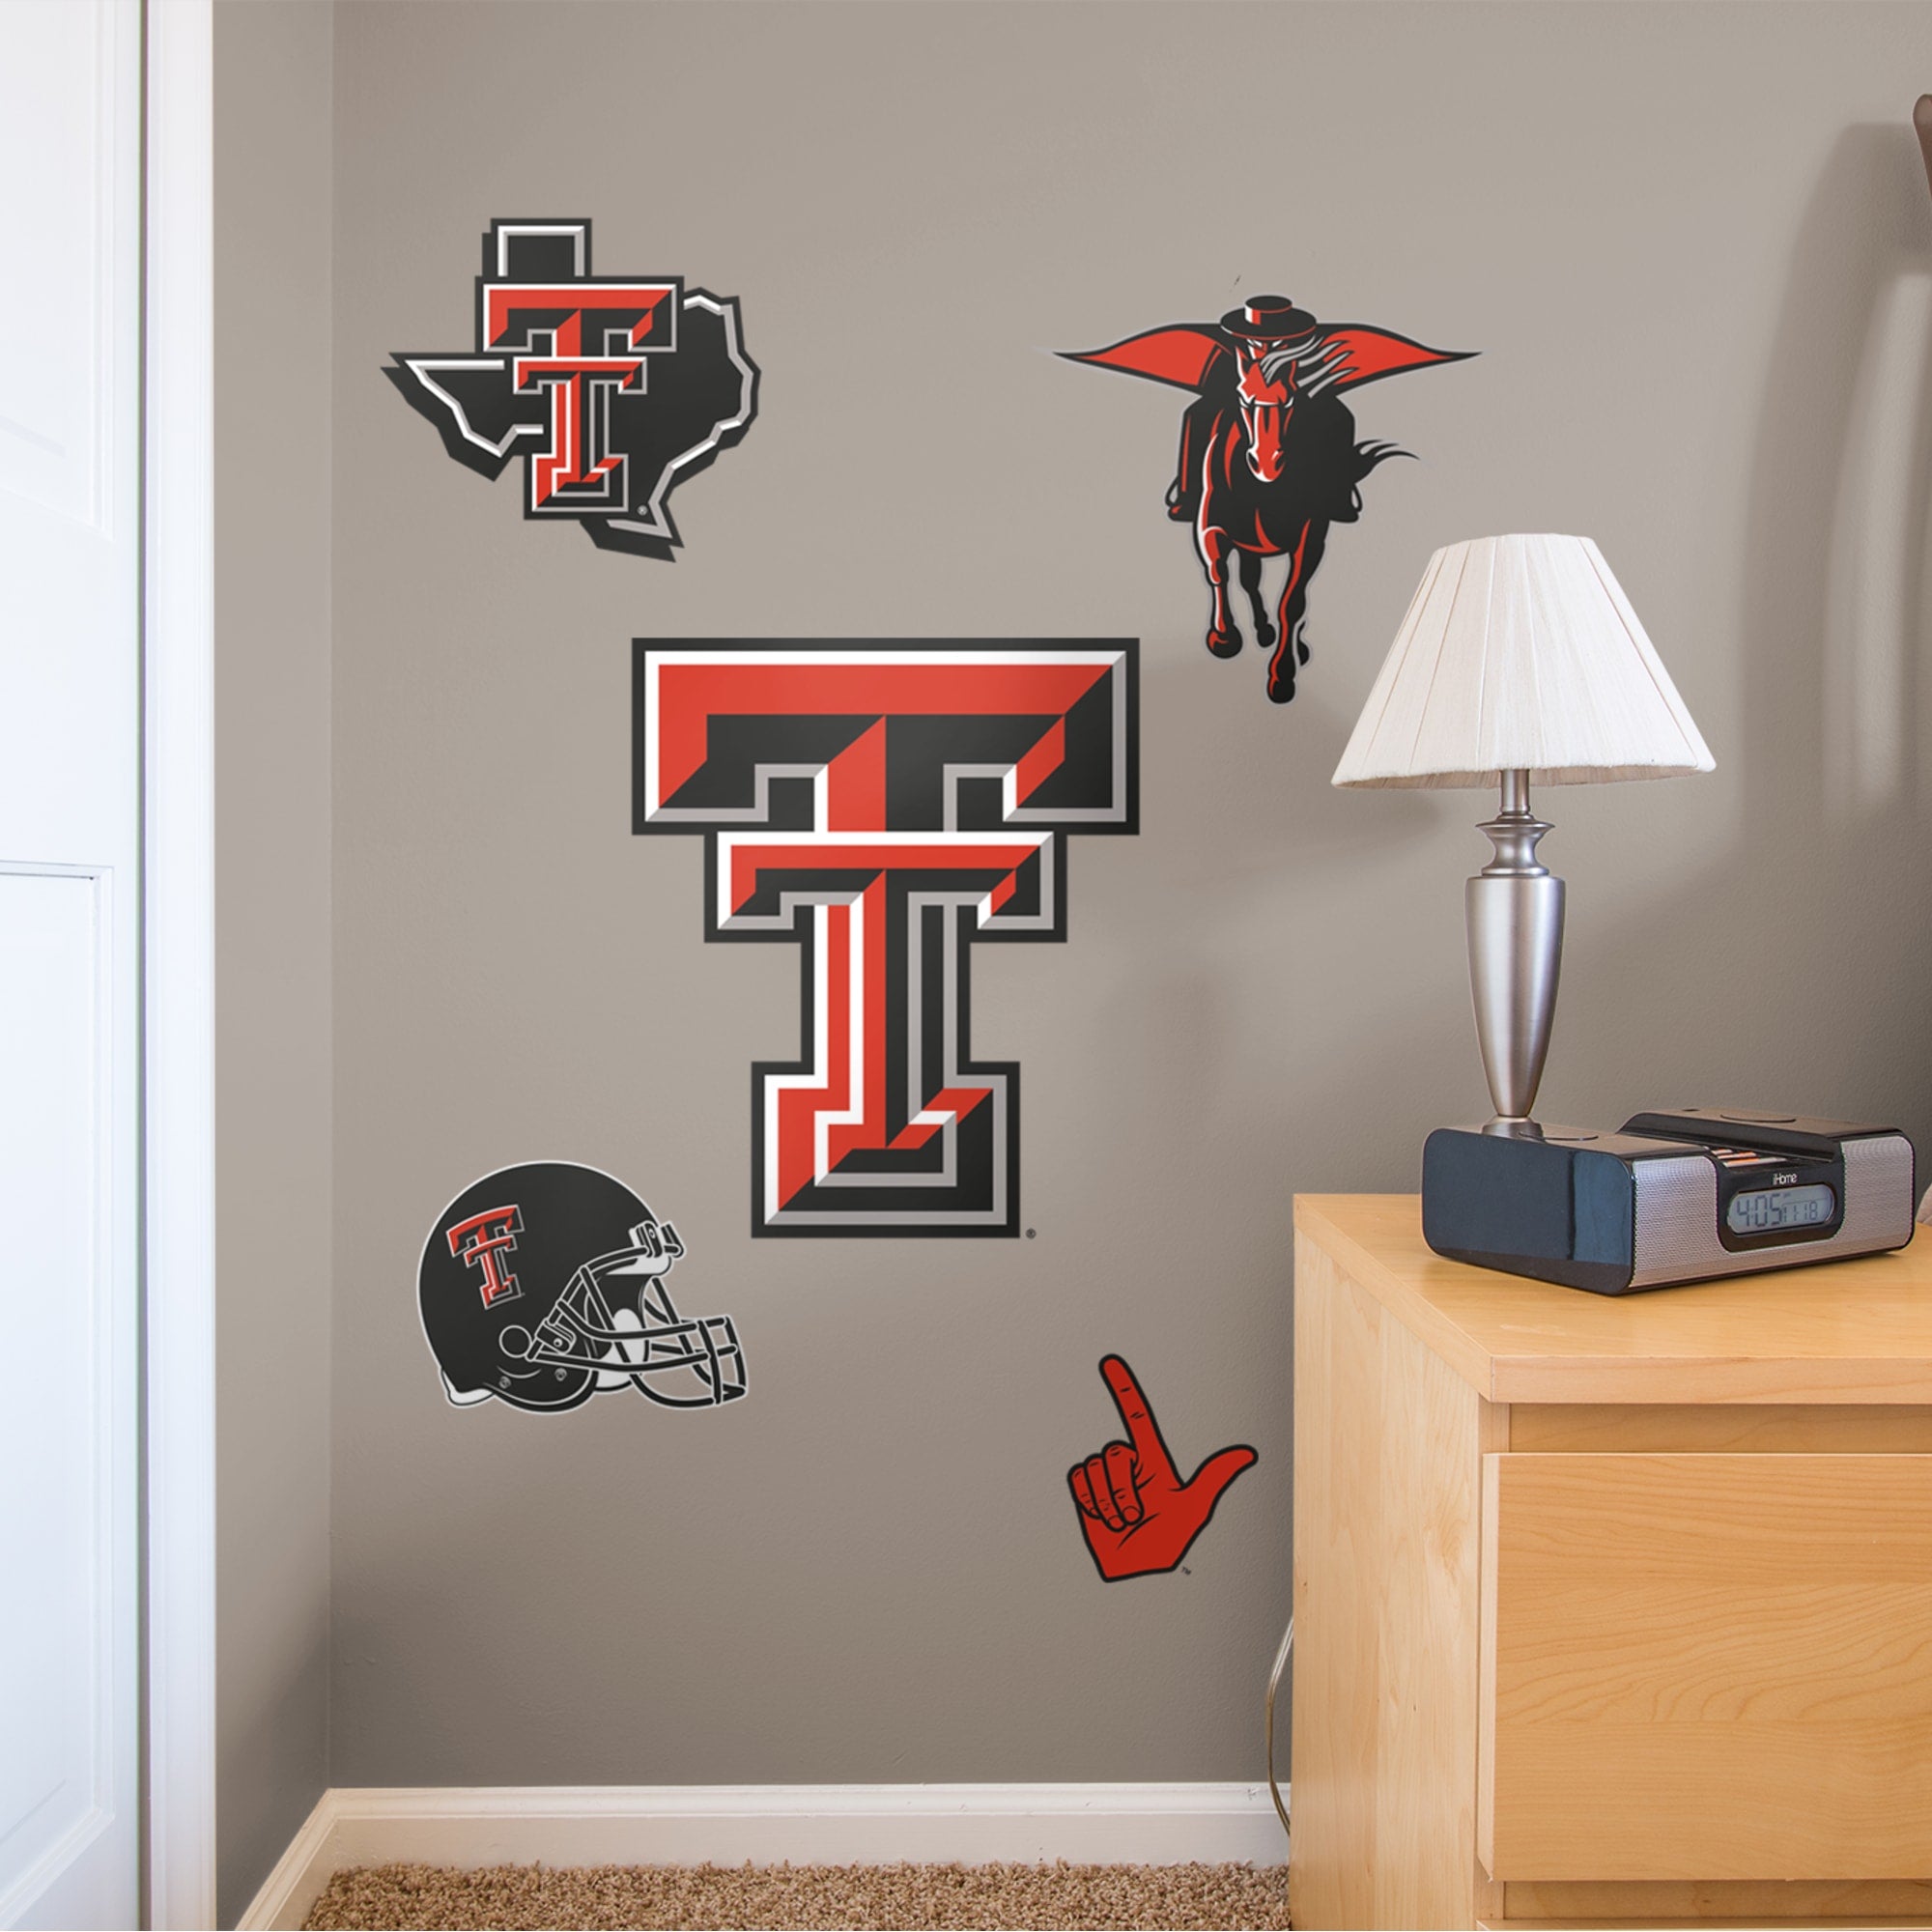 Texas Tech Red Raiders: Logo Assortment - Officially Licensed Removable Wall Decals 26.0"W x 39.0"H by Fathead | Vinyl